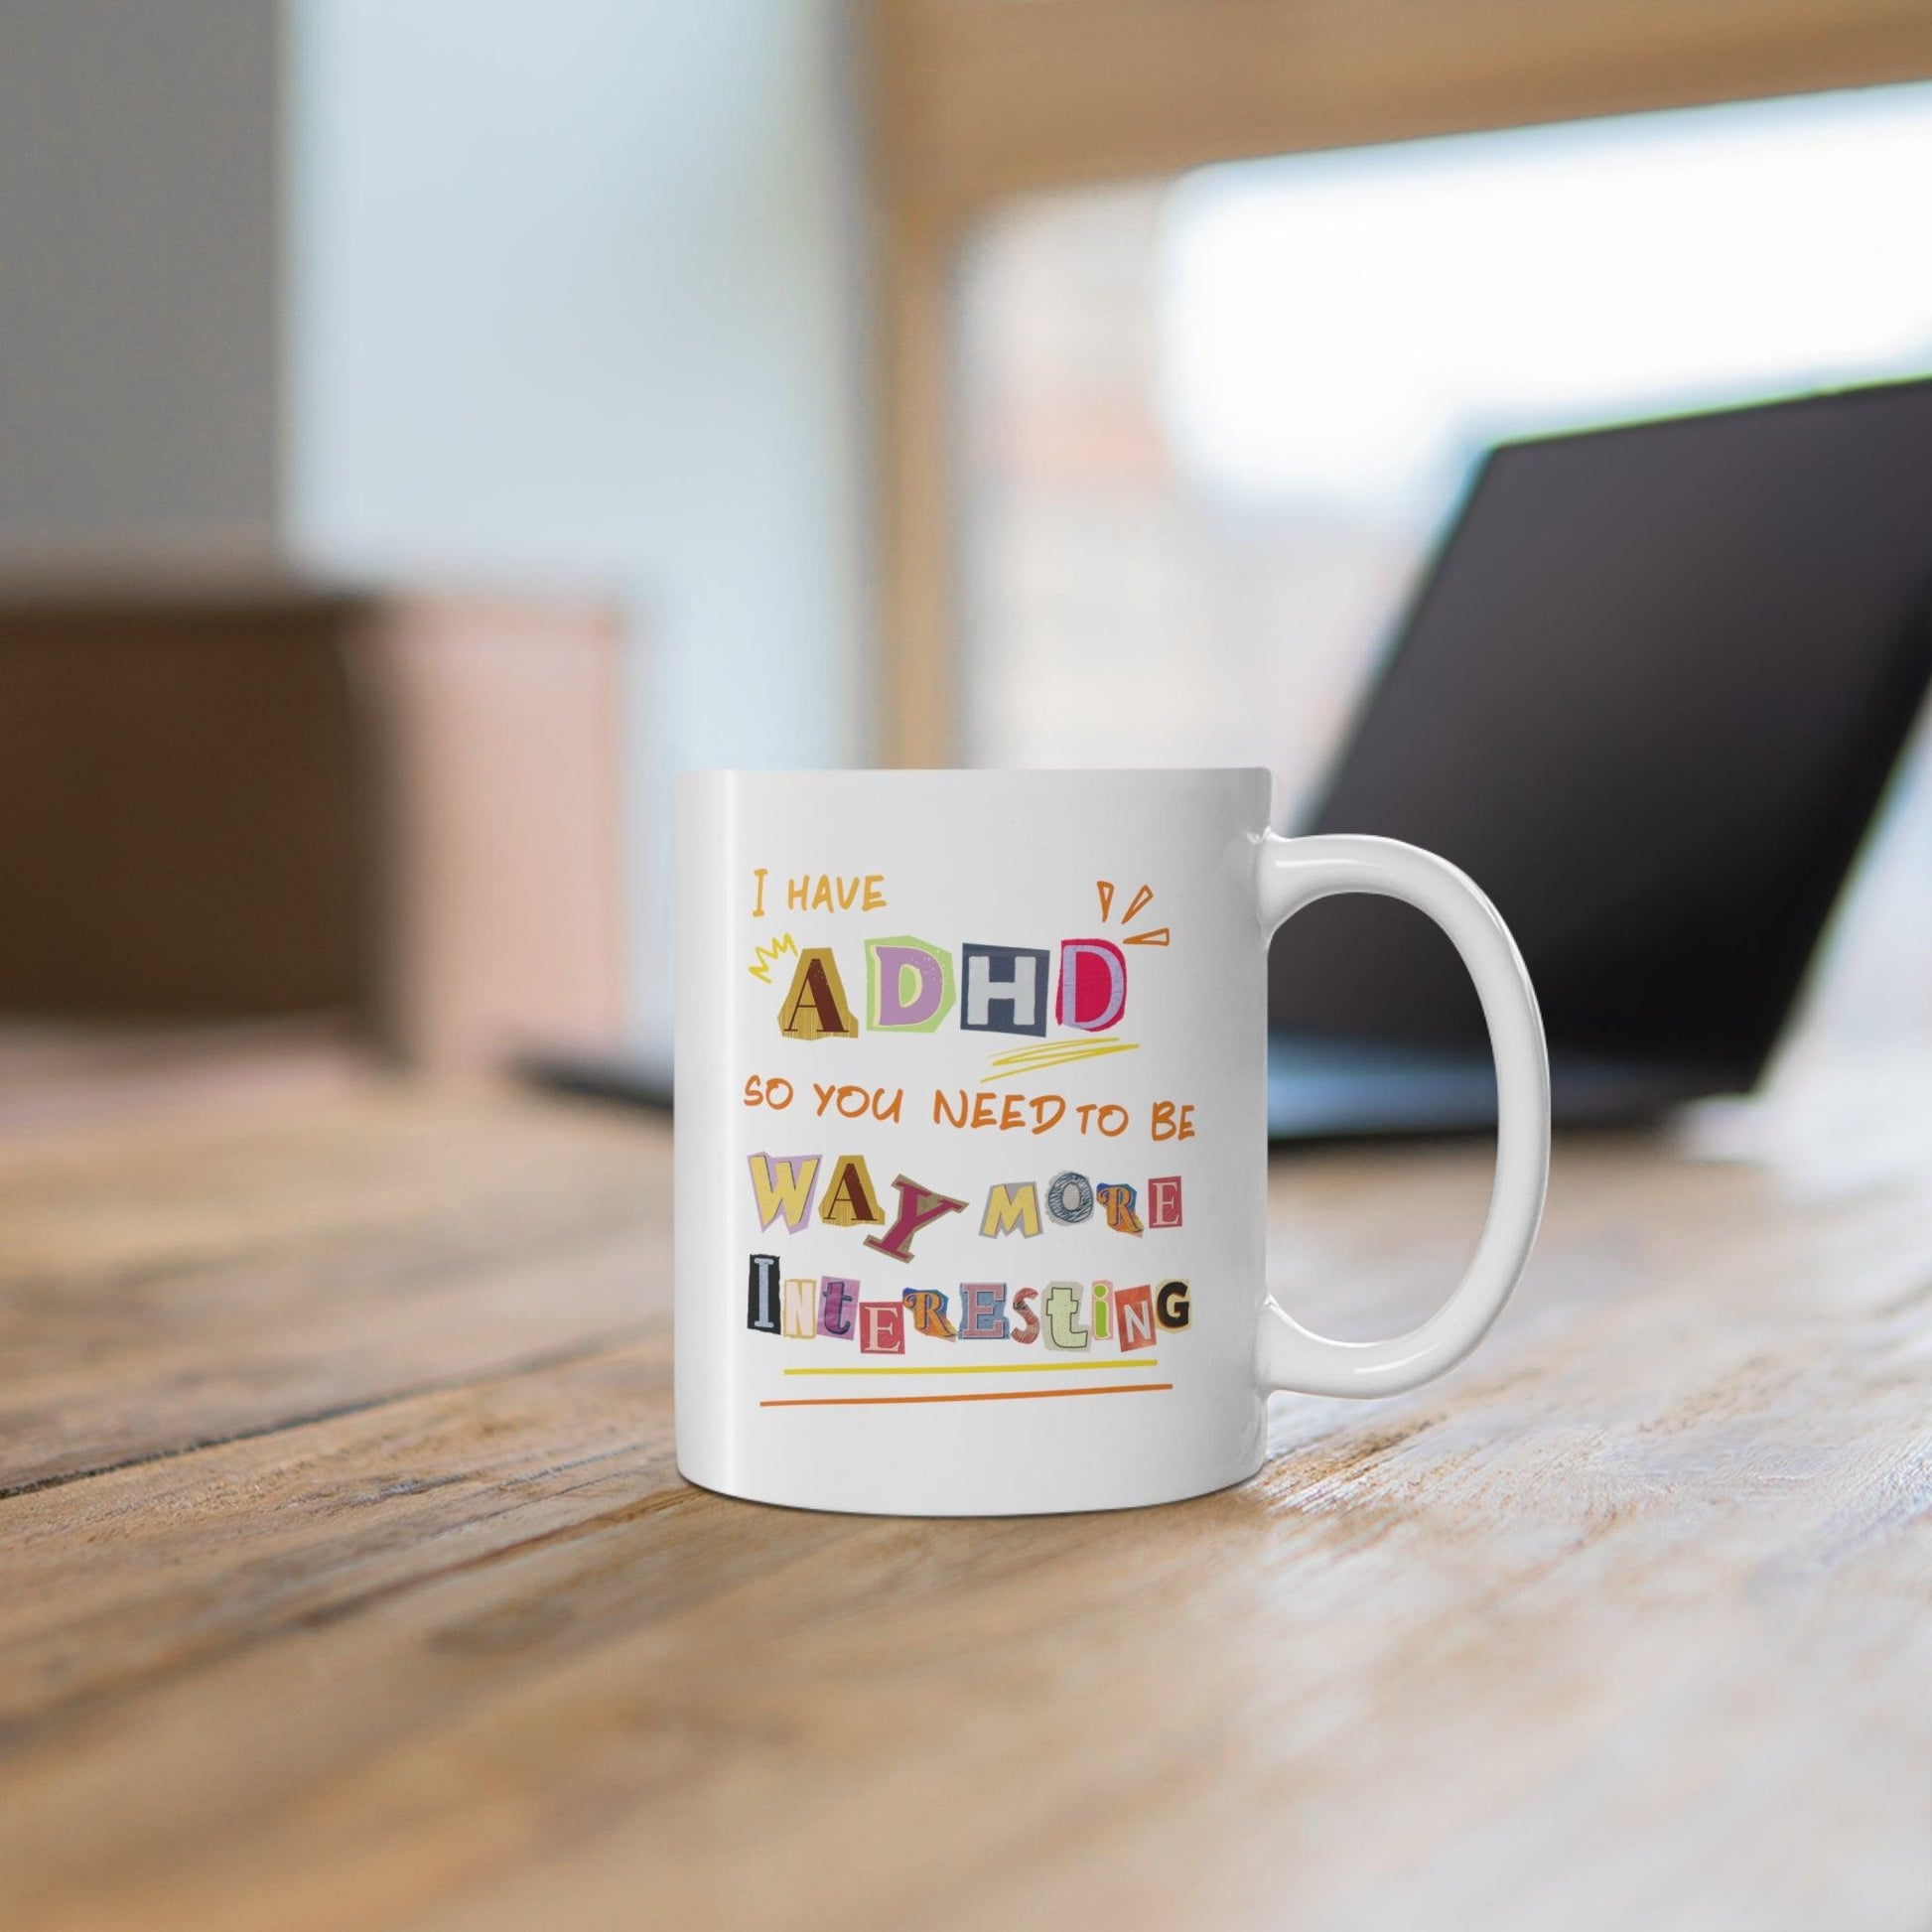 ADHD 'Be More Interesting' Mug - Funny and Quippy Coffee Cup - Fidget and Focus